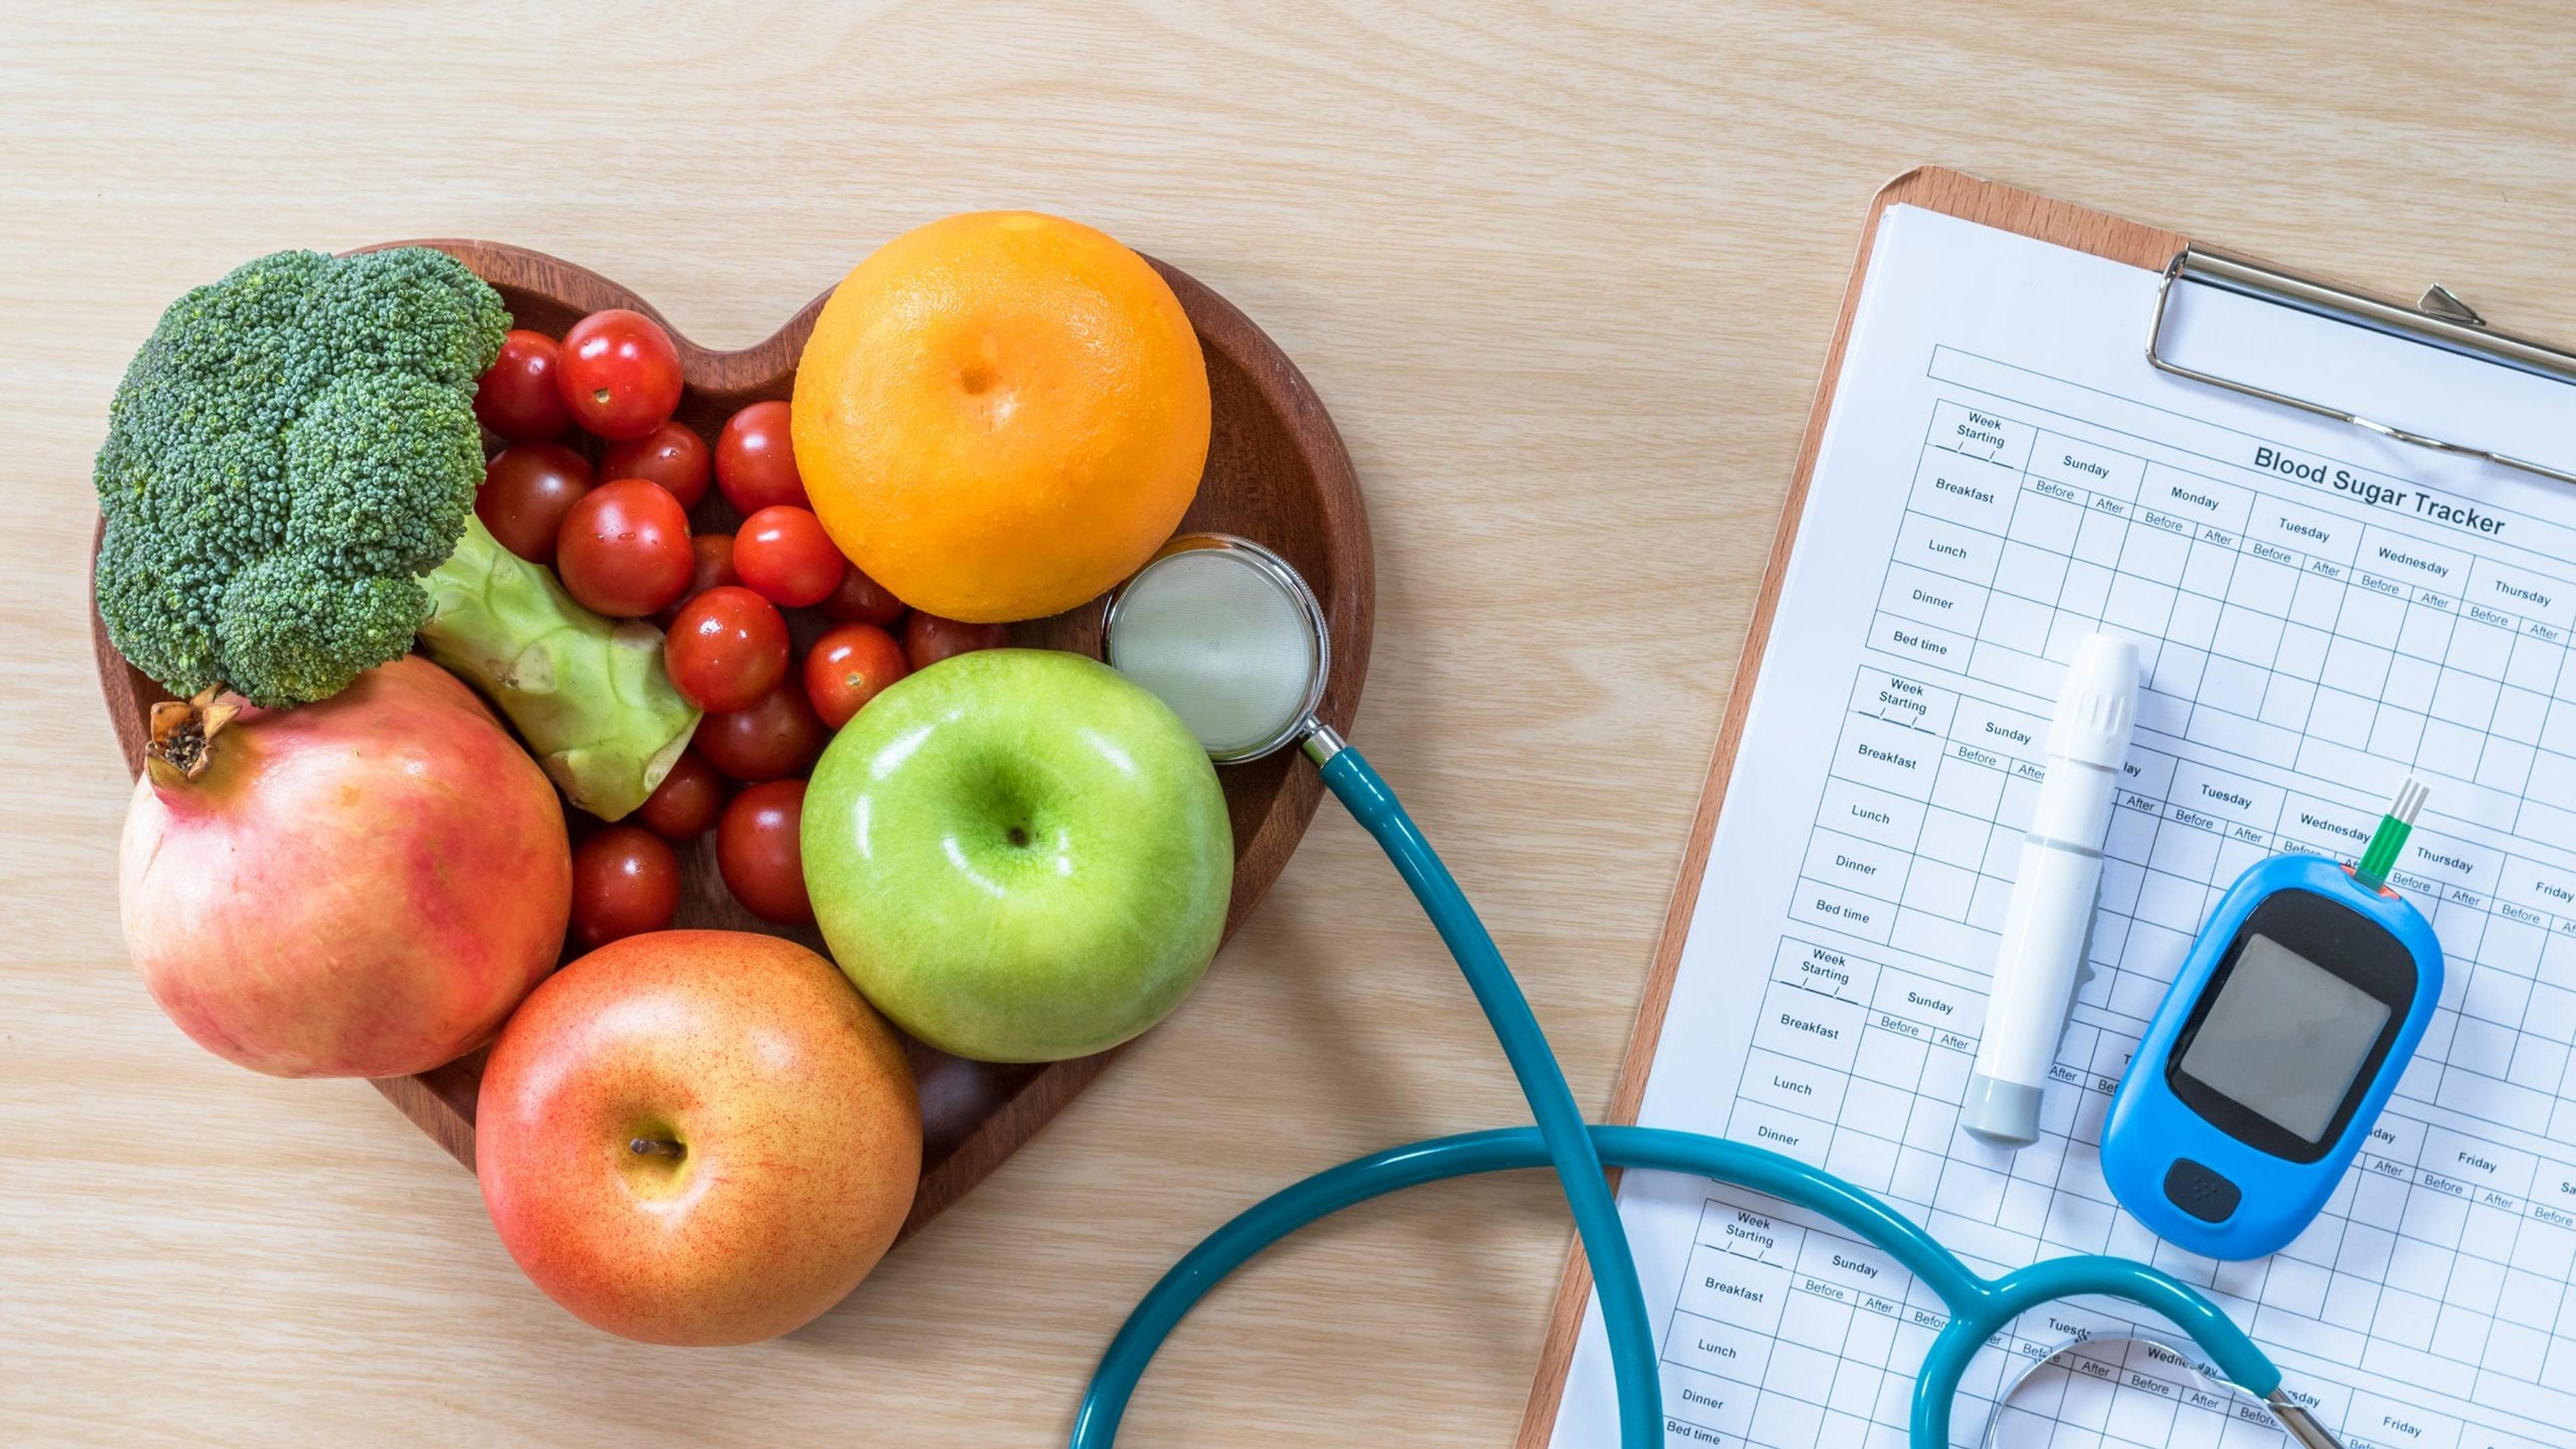 Bowl of fruit and vegetables with stethoscope and diabetes monitor